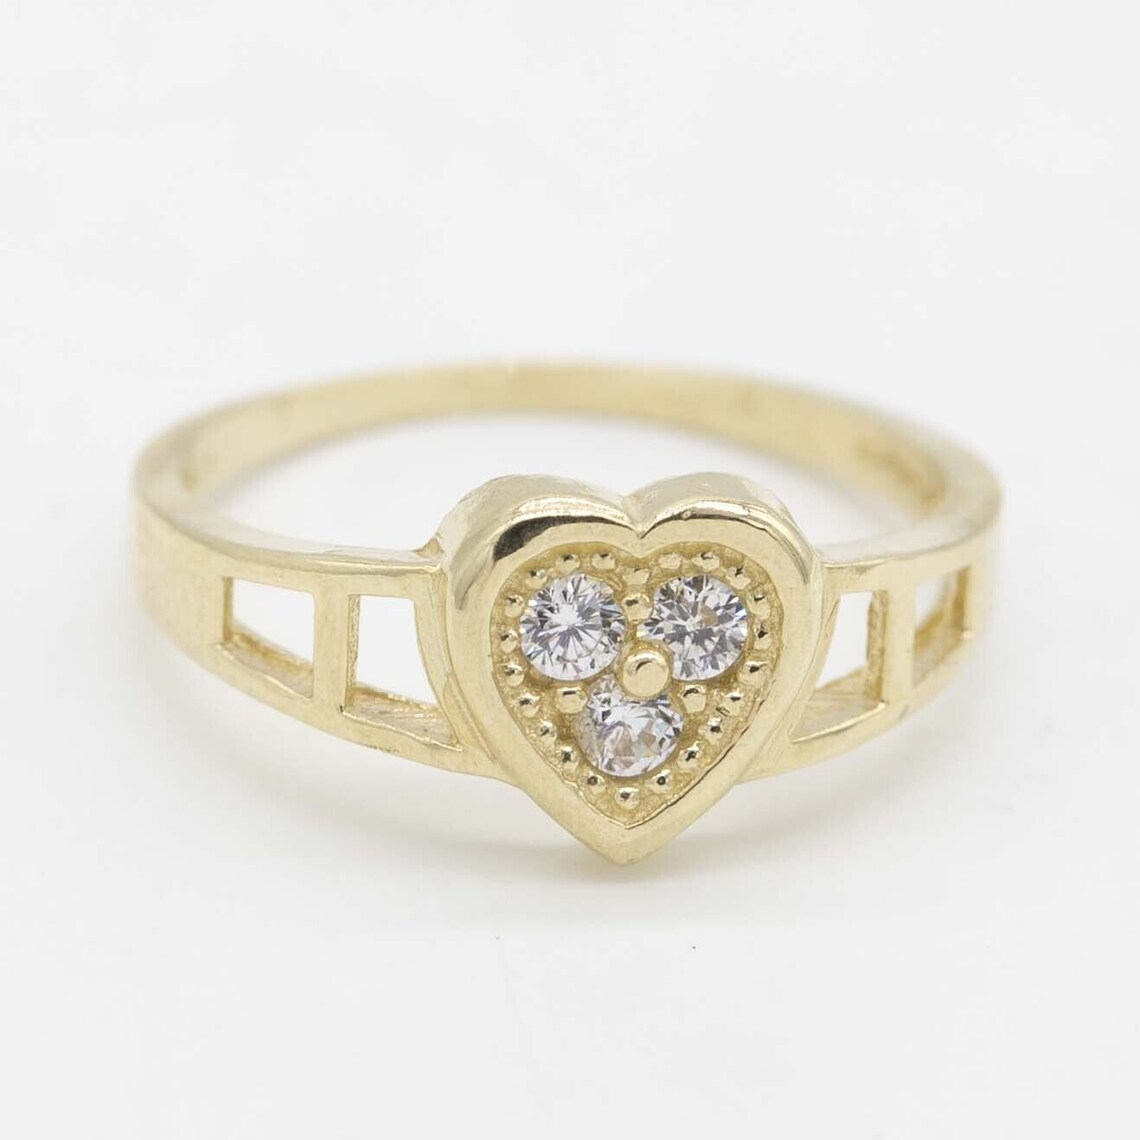 Zircon Heart Ring Personalized Engraved Ring